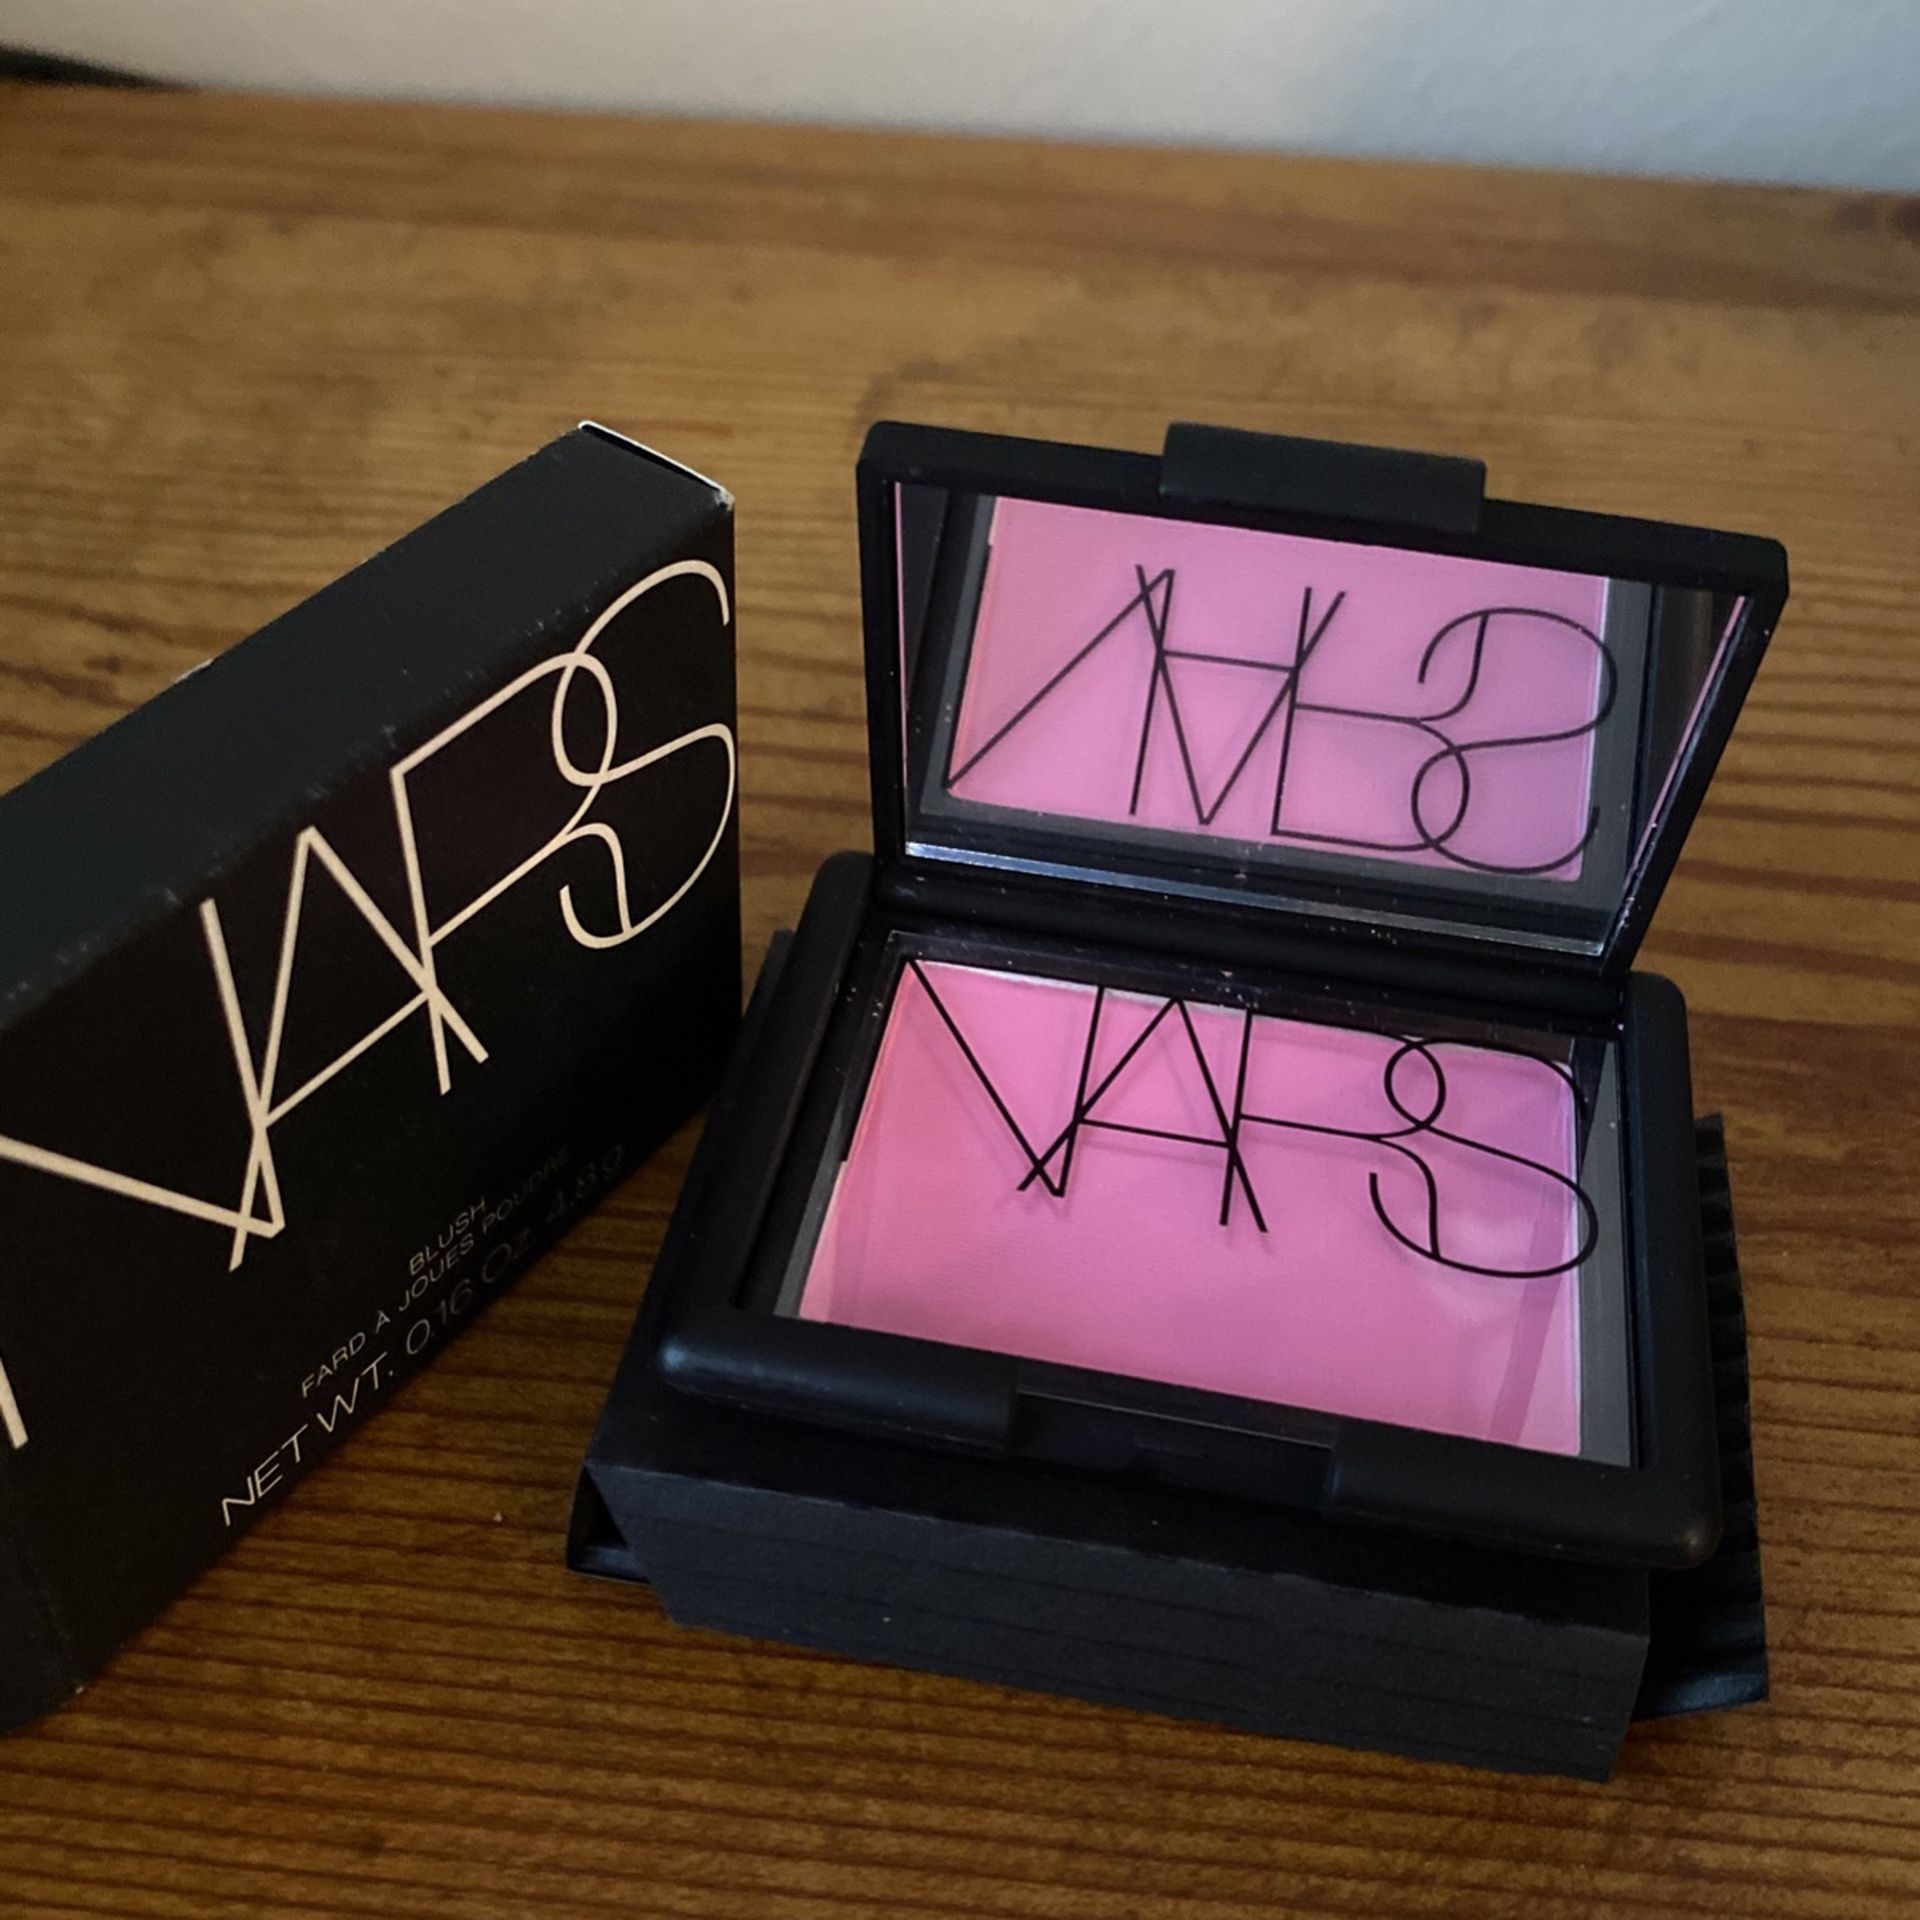 Nars blush for Sale in Oxnard, CA - OfferUp